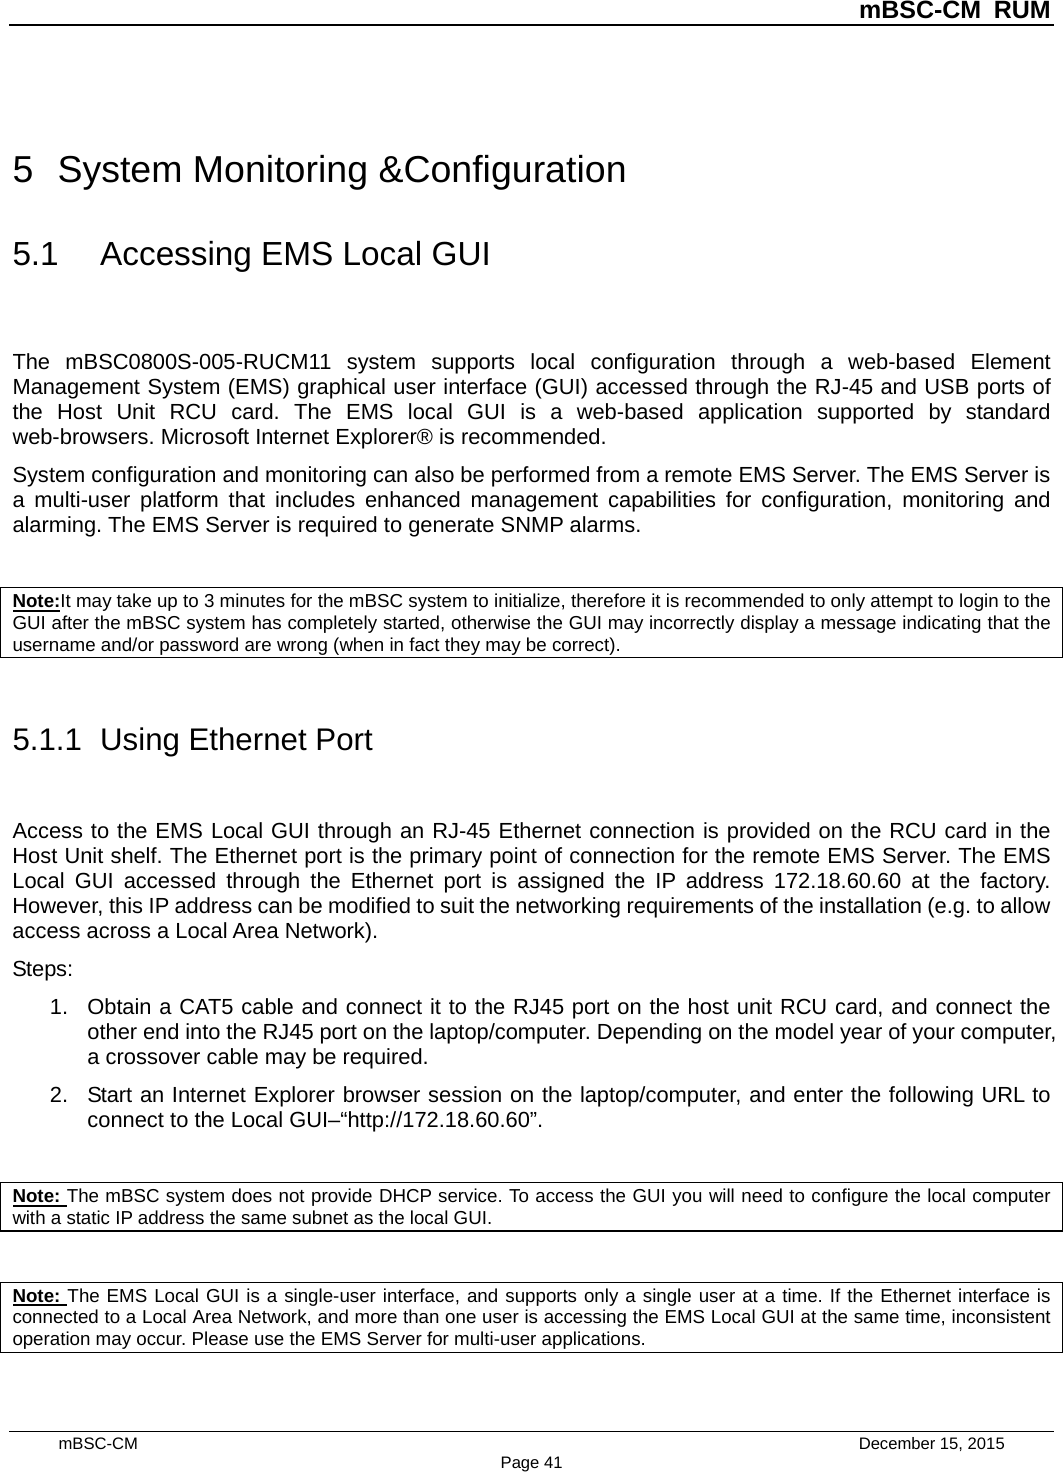          mBSC-CM RUM   mBSC-CM                                 December 15, 2015 Page 41 5  System Monitoring &amp;Configuration 5.1 Accessing EMS Local GUI The mBSC0800S-005-RUCM11 system supports local configuration through a web-based Element Management System (EMS) graphical user interface (GUI) accessed through the RJ-45 and USB ports of the Host Unit RCU card. The EMS local GUI is a web-based application supported by standard web-browsers. Microsoft Internet Explorer® is recommended. System configuration and monitoring can also be performed from a remote EMS Server. The EMS Server is a multi-user platform that includes enhanced management capabilities for configuration, monitoring and alarming. The EMS Server is required to generate SNMP alarms.  Note:It may take up to 3 minutes for the mBSC system to initialize, therefore it is recommended to only attempt to login to the GUI after the mBSC system has completely started, otherwise the GUI may incorrectly display a message indicating that the username and/or password are wrong (when in fact they may be correct).  5.1.1  Using Ethernet Port Access to the EMS Local GUI through an RJ-45 Ethernet connection is provided on the RCU card in the Host Unit shelf. The Ethernet port is the primary point of connection for the remote EMS Server. The EMS Local GUI accessed through the Ethernet port is assigned the IP address 172.18.60.60 at the factory. However, this IP address can be modified to suit the networking requirements of the installation (e.g. to allow access across a Local Area Network). Steps: 1. Obtain a CAT5 cable and connect it to the RJ45 port on the host unit RCU card, and connect the other end into the RJ45 port on the laptop/computer. Depending on the model year of your computer, a crossover cable may be required.   2. Start an Internet Explorer browser session on the laptop/computer, and enter the following URL to connect to the Local GUI–“http://172.18.60.60”.    Note: The mBSC system does not provide DHCP service. To access the GUI you will need to configure the local computer with a static IP address the same subnet as the local GUI.  Note: The EMS Local GUI is a single-user interface, and supports only a single user at a time. If the Ethernet interface is connected to a Local Area Network, and more than one user is accessing the EMS Local GUI at the same time, inconsistent operation may occur. Please use the EMS Server for multi-user applications. 